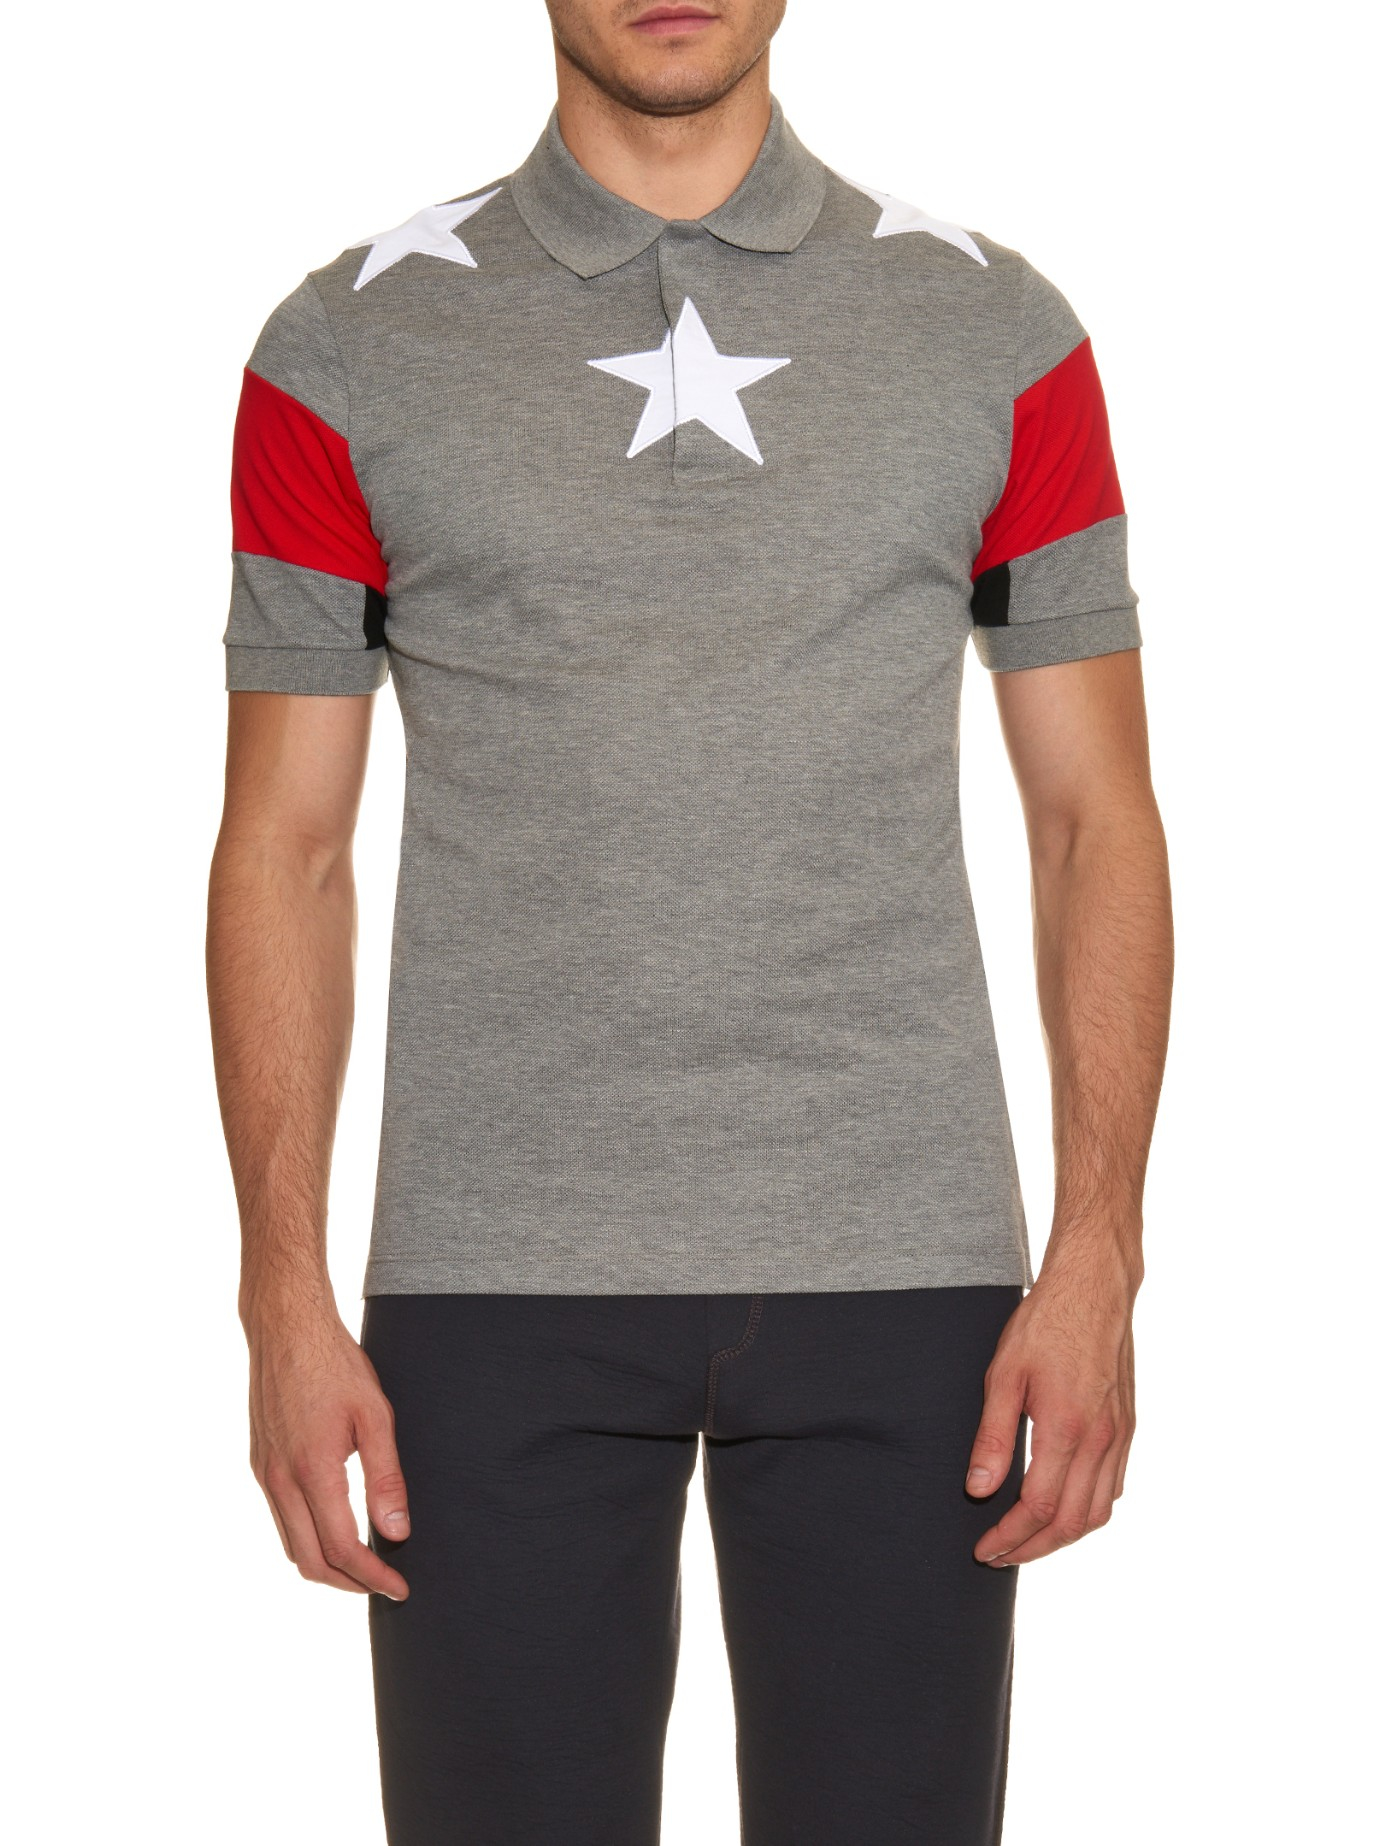 Lyst - Givenchy Cuban-Fit Star-Embroidered Polo Shirt in Gray for Men